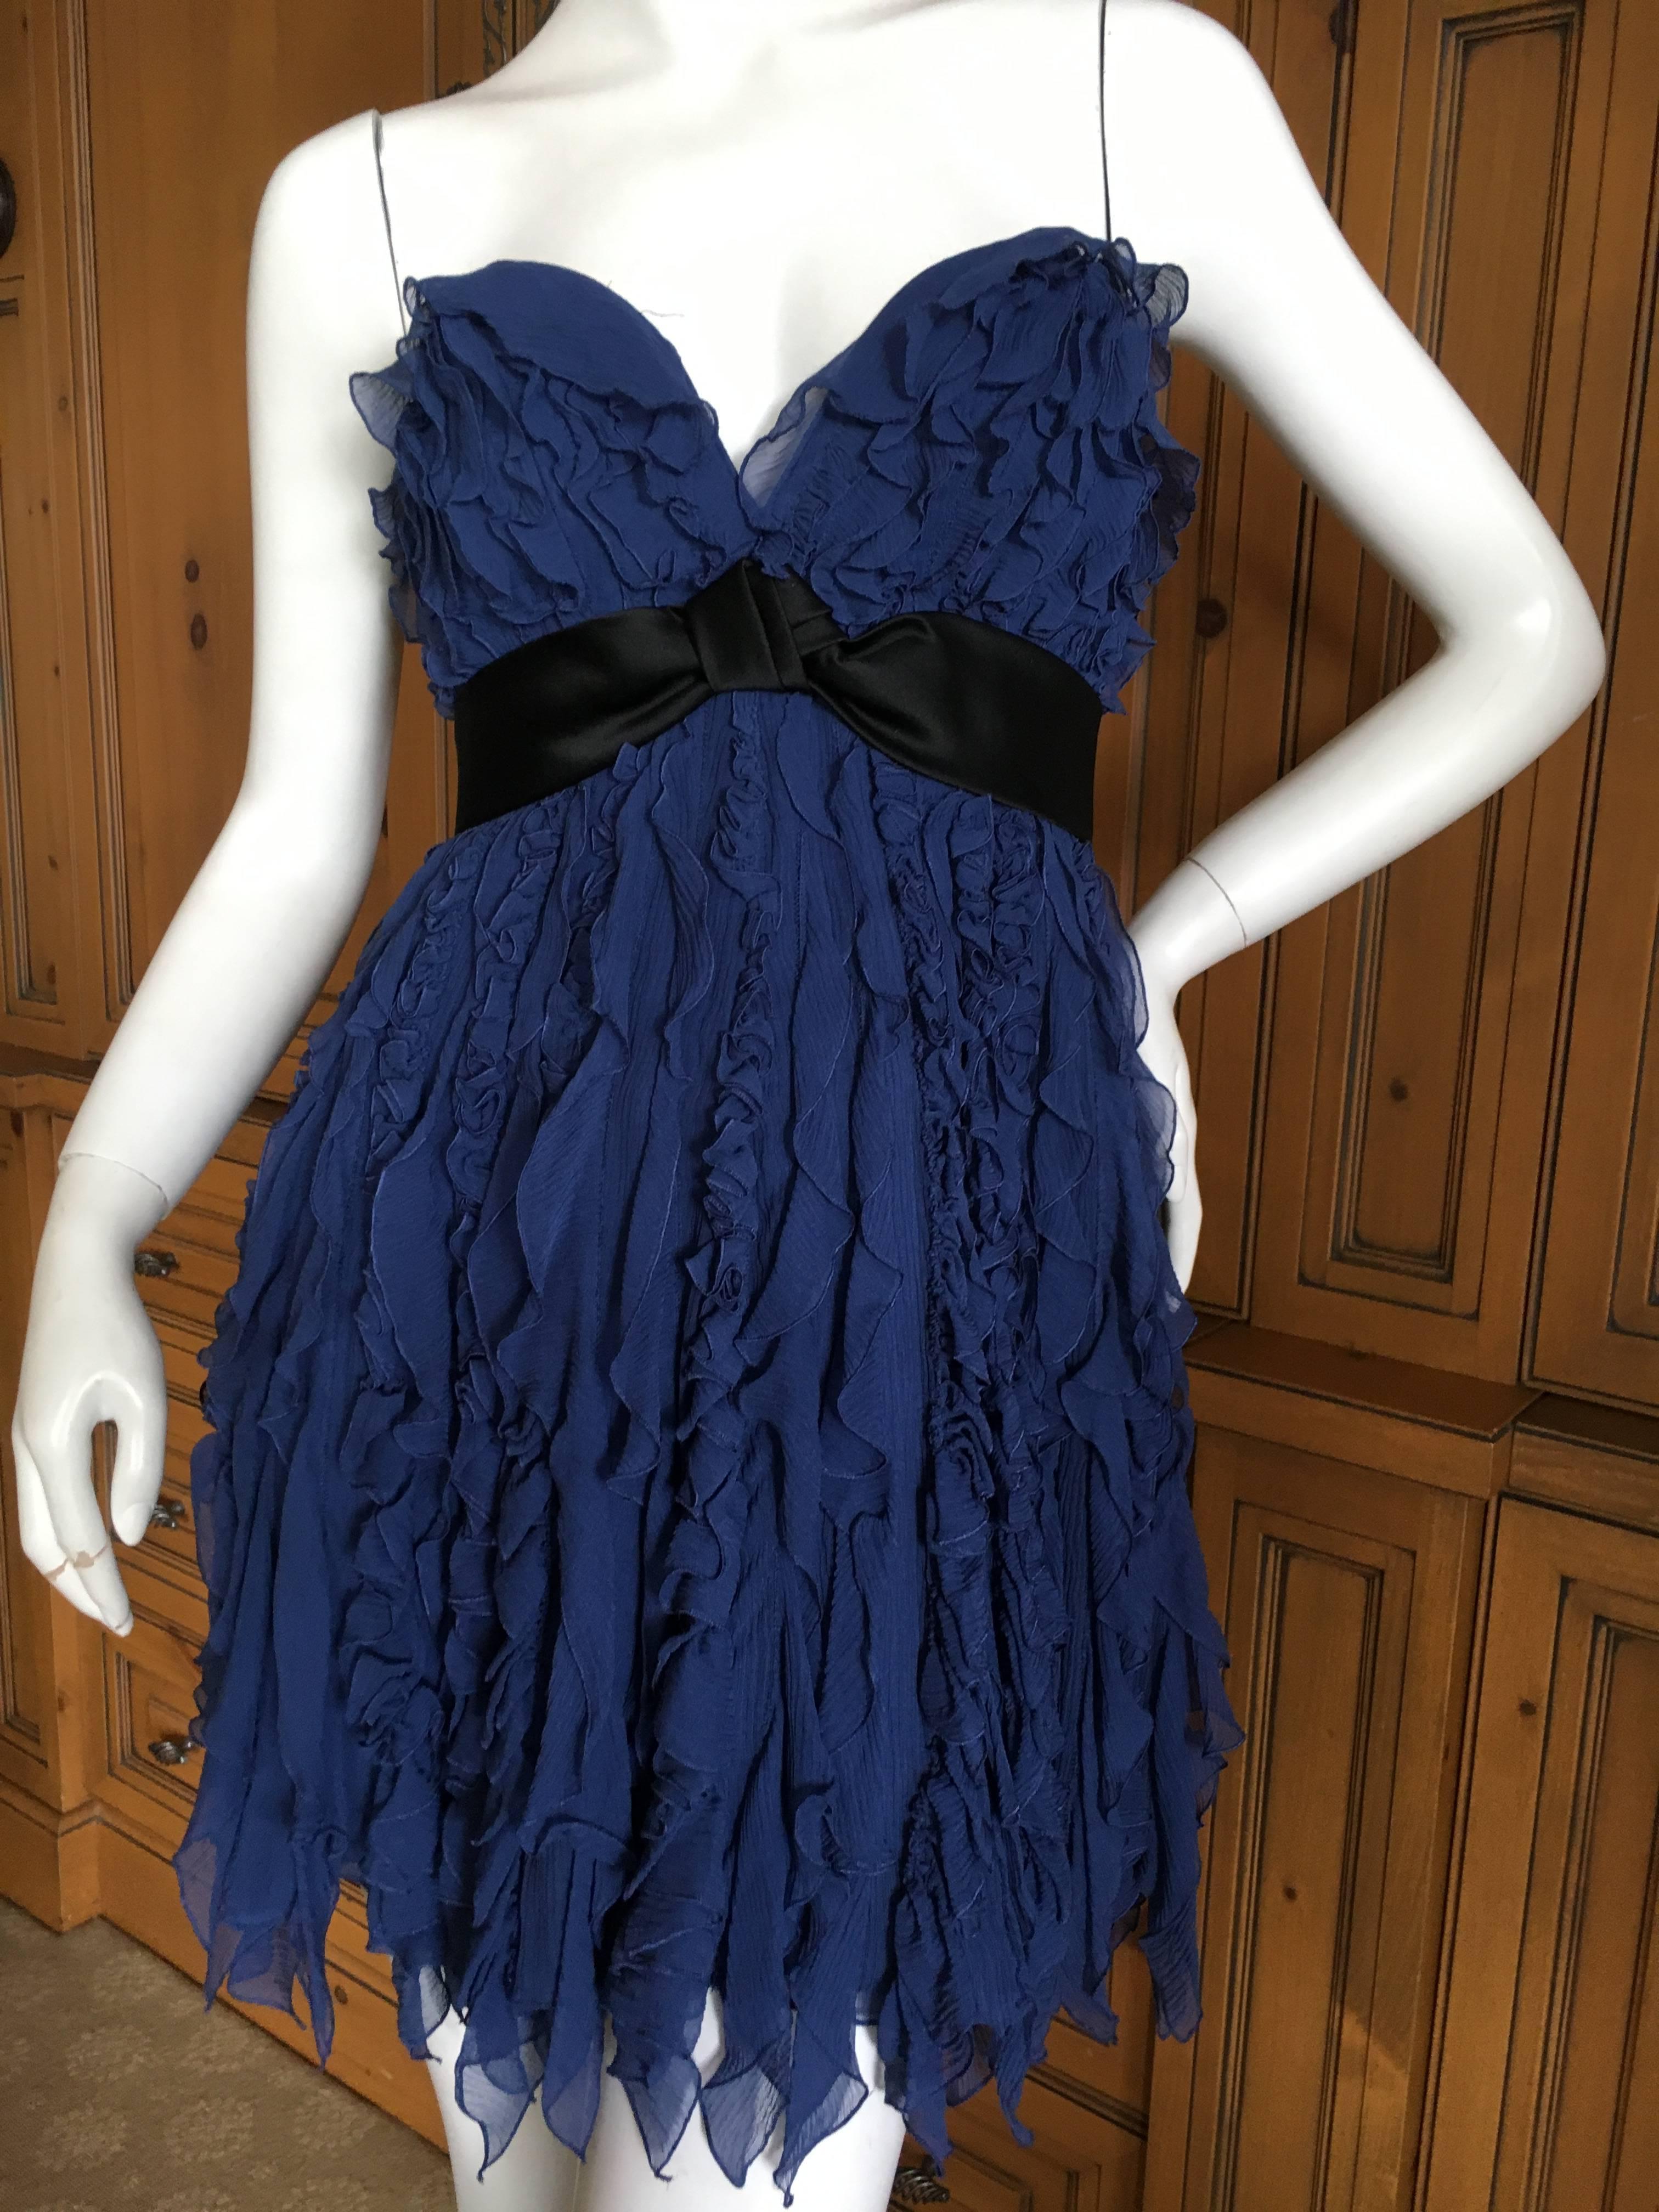 Jenny Packham Ruffled Silk Mini Dress In Excellent Condition For Sale In Cloverdale, CA